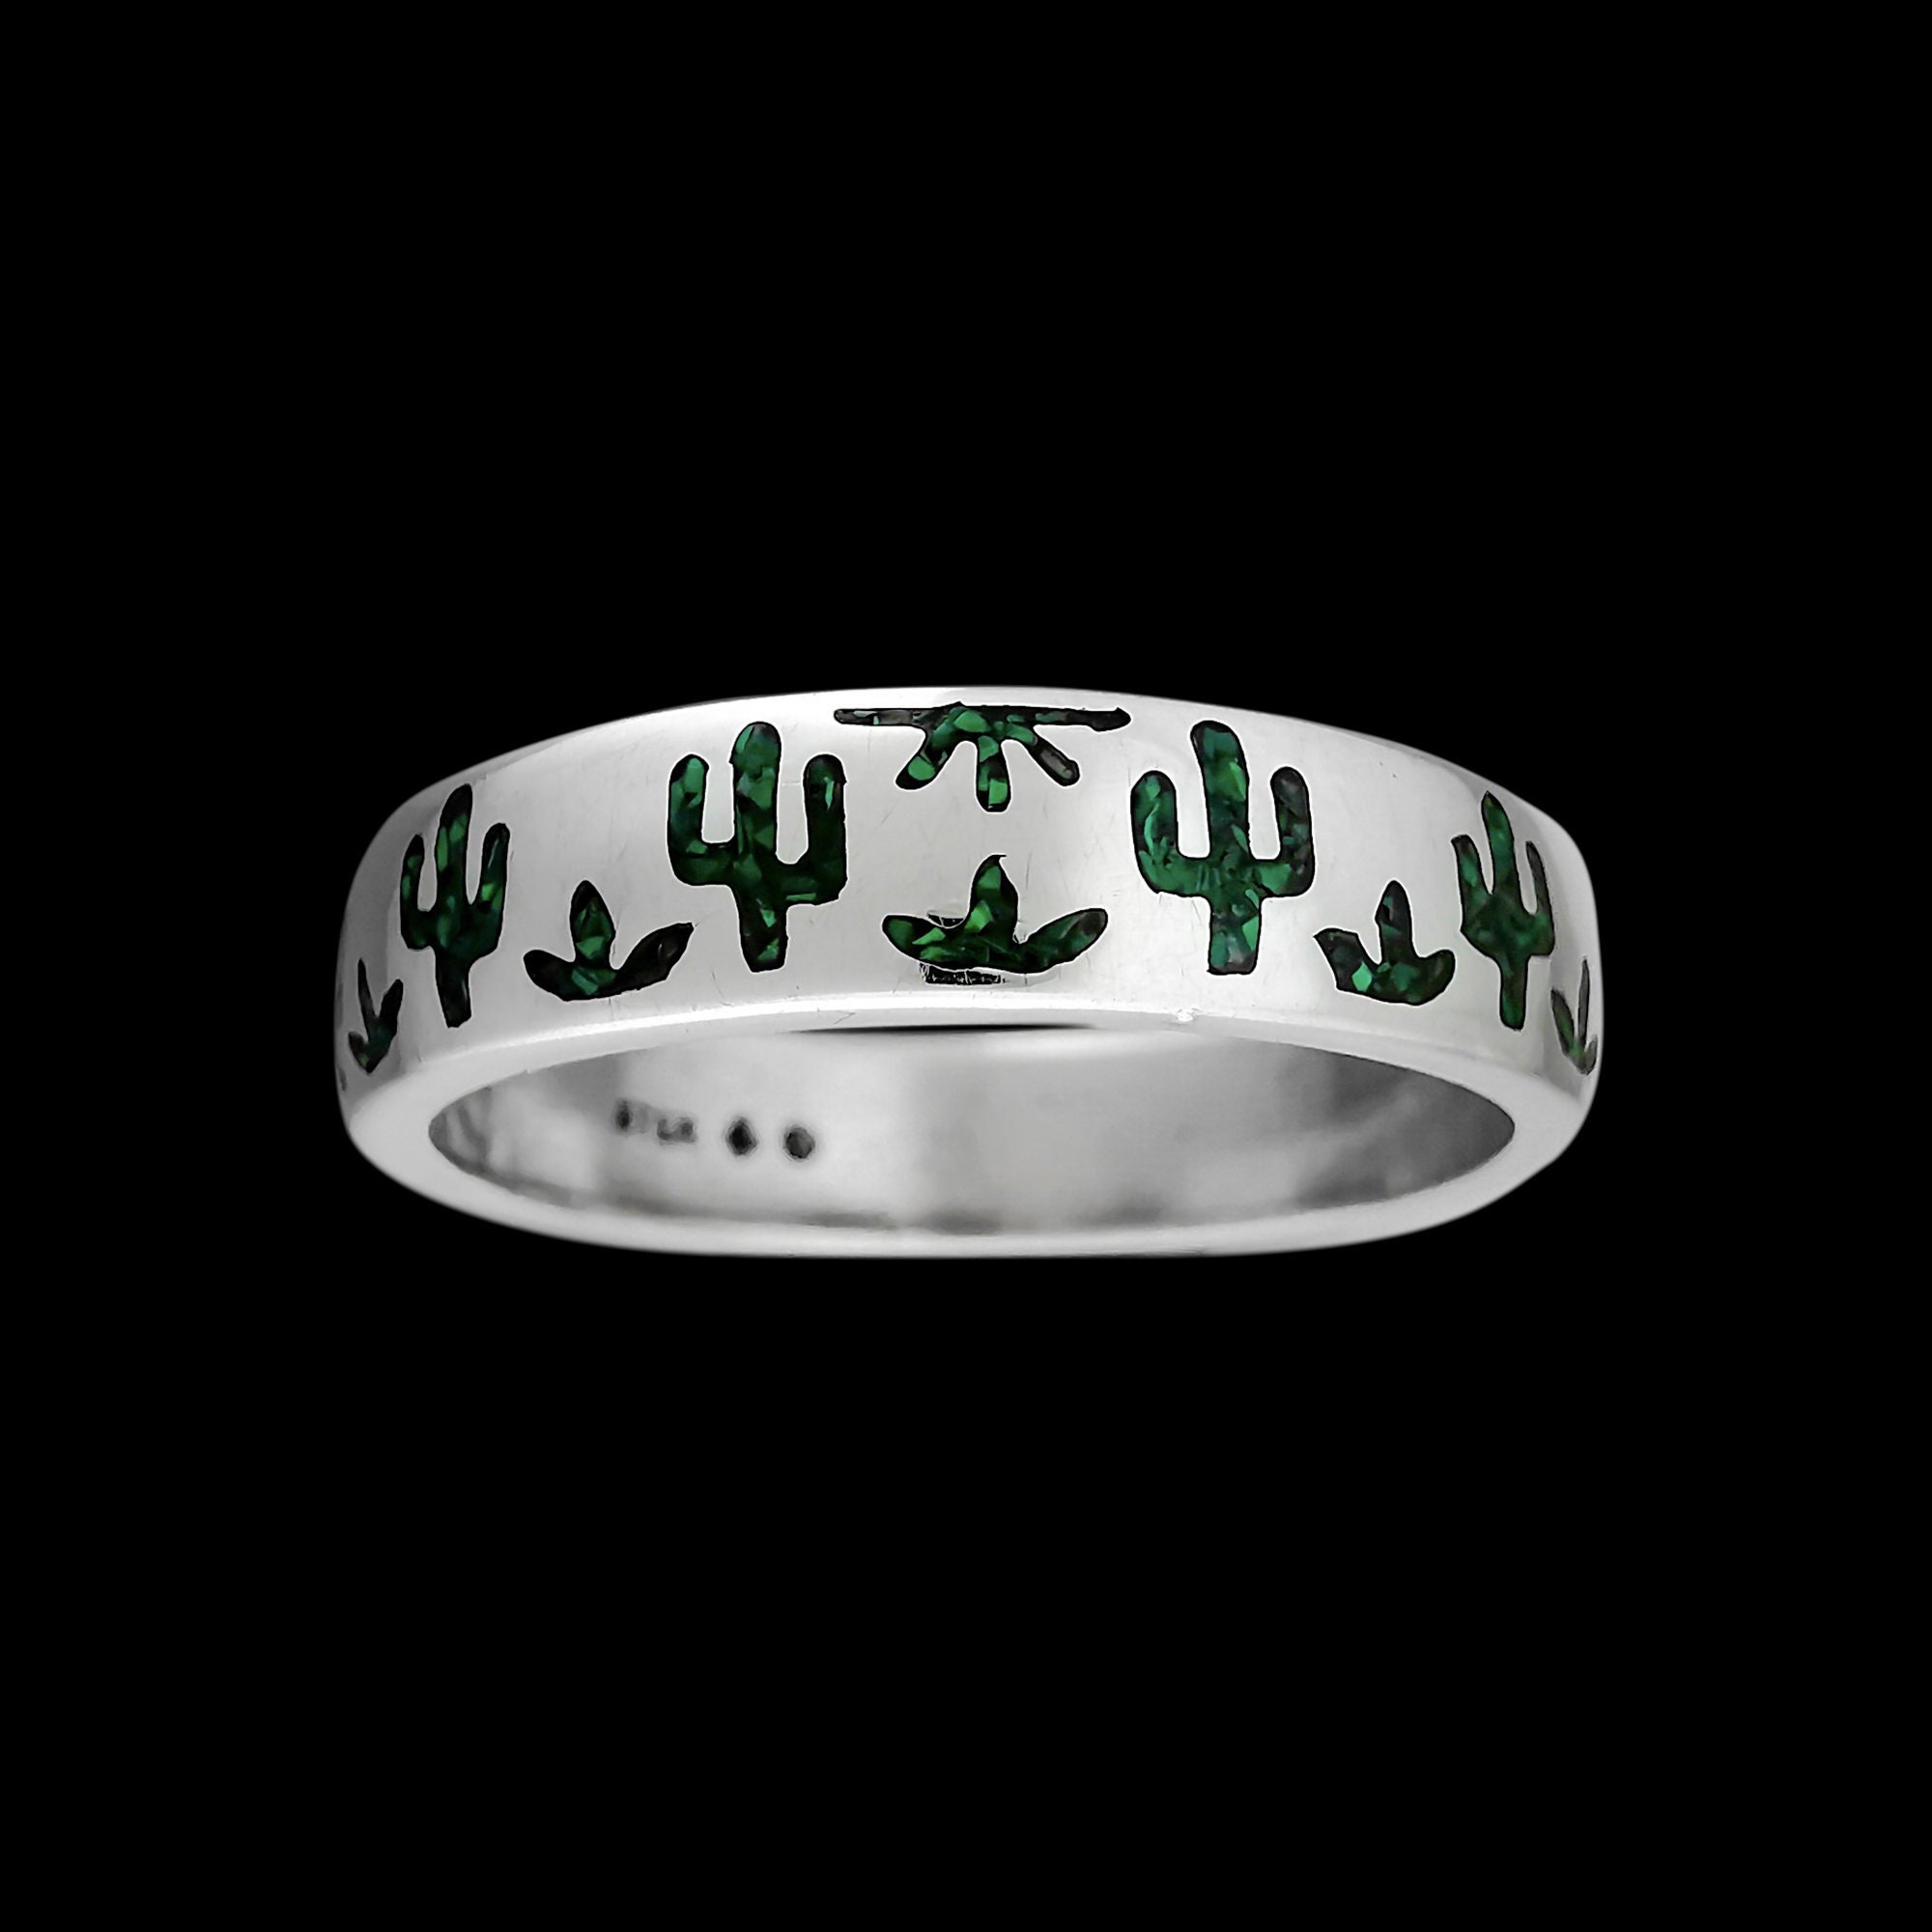 Sterling silver Southwestern Cactus ring with Malachite chip inlay 